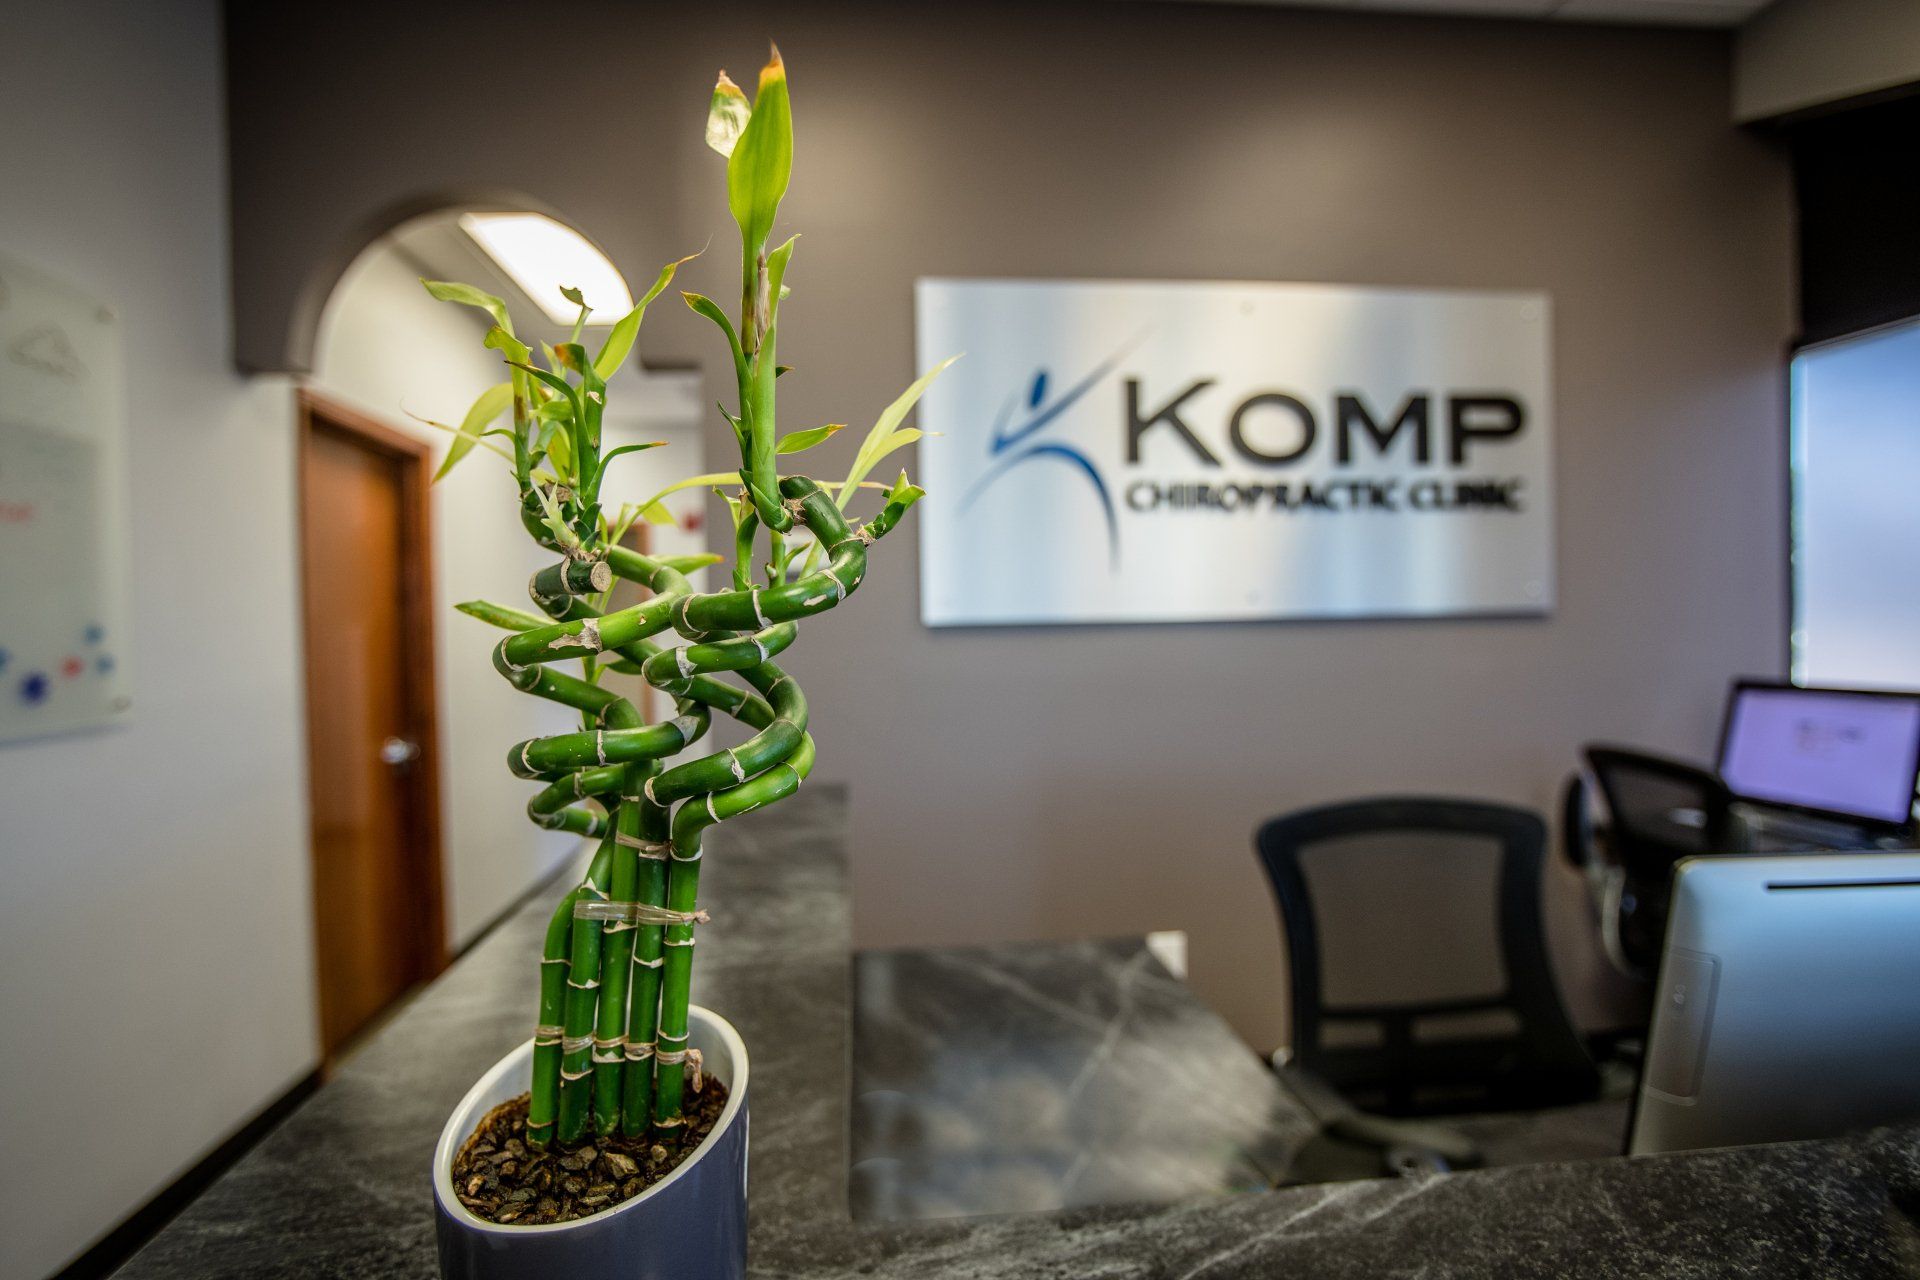 Picture of the offices at komp chiropractic and acupuncture clinic